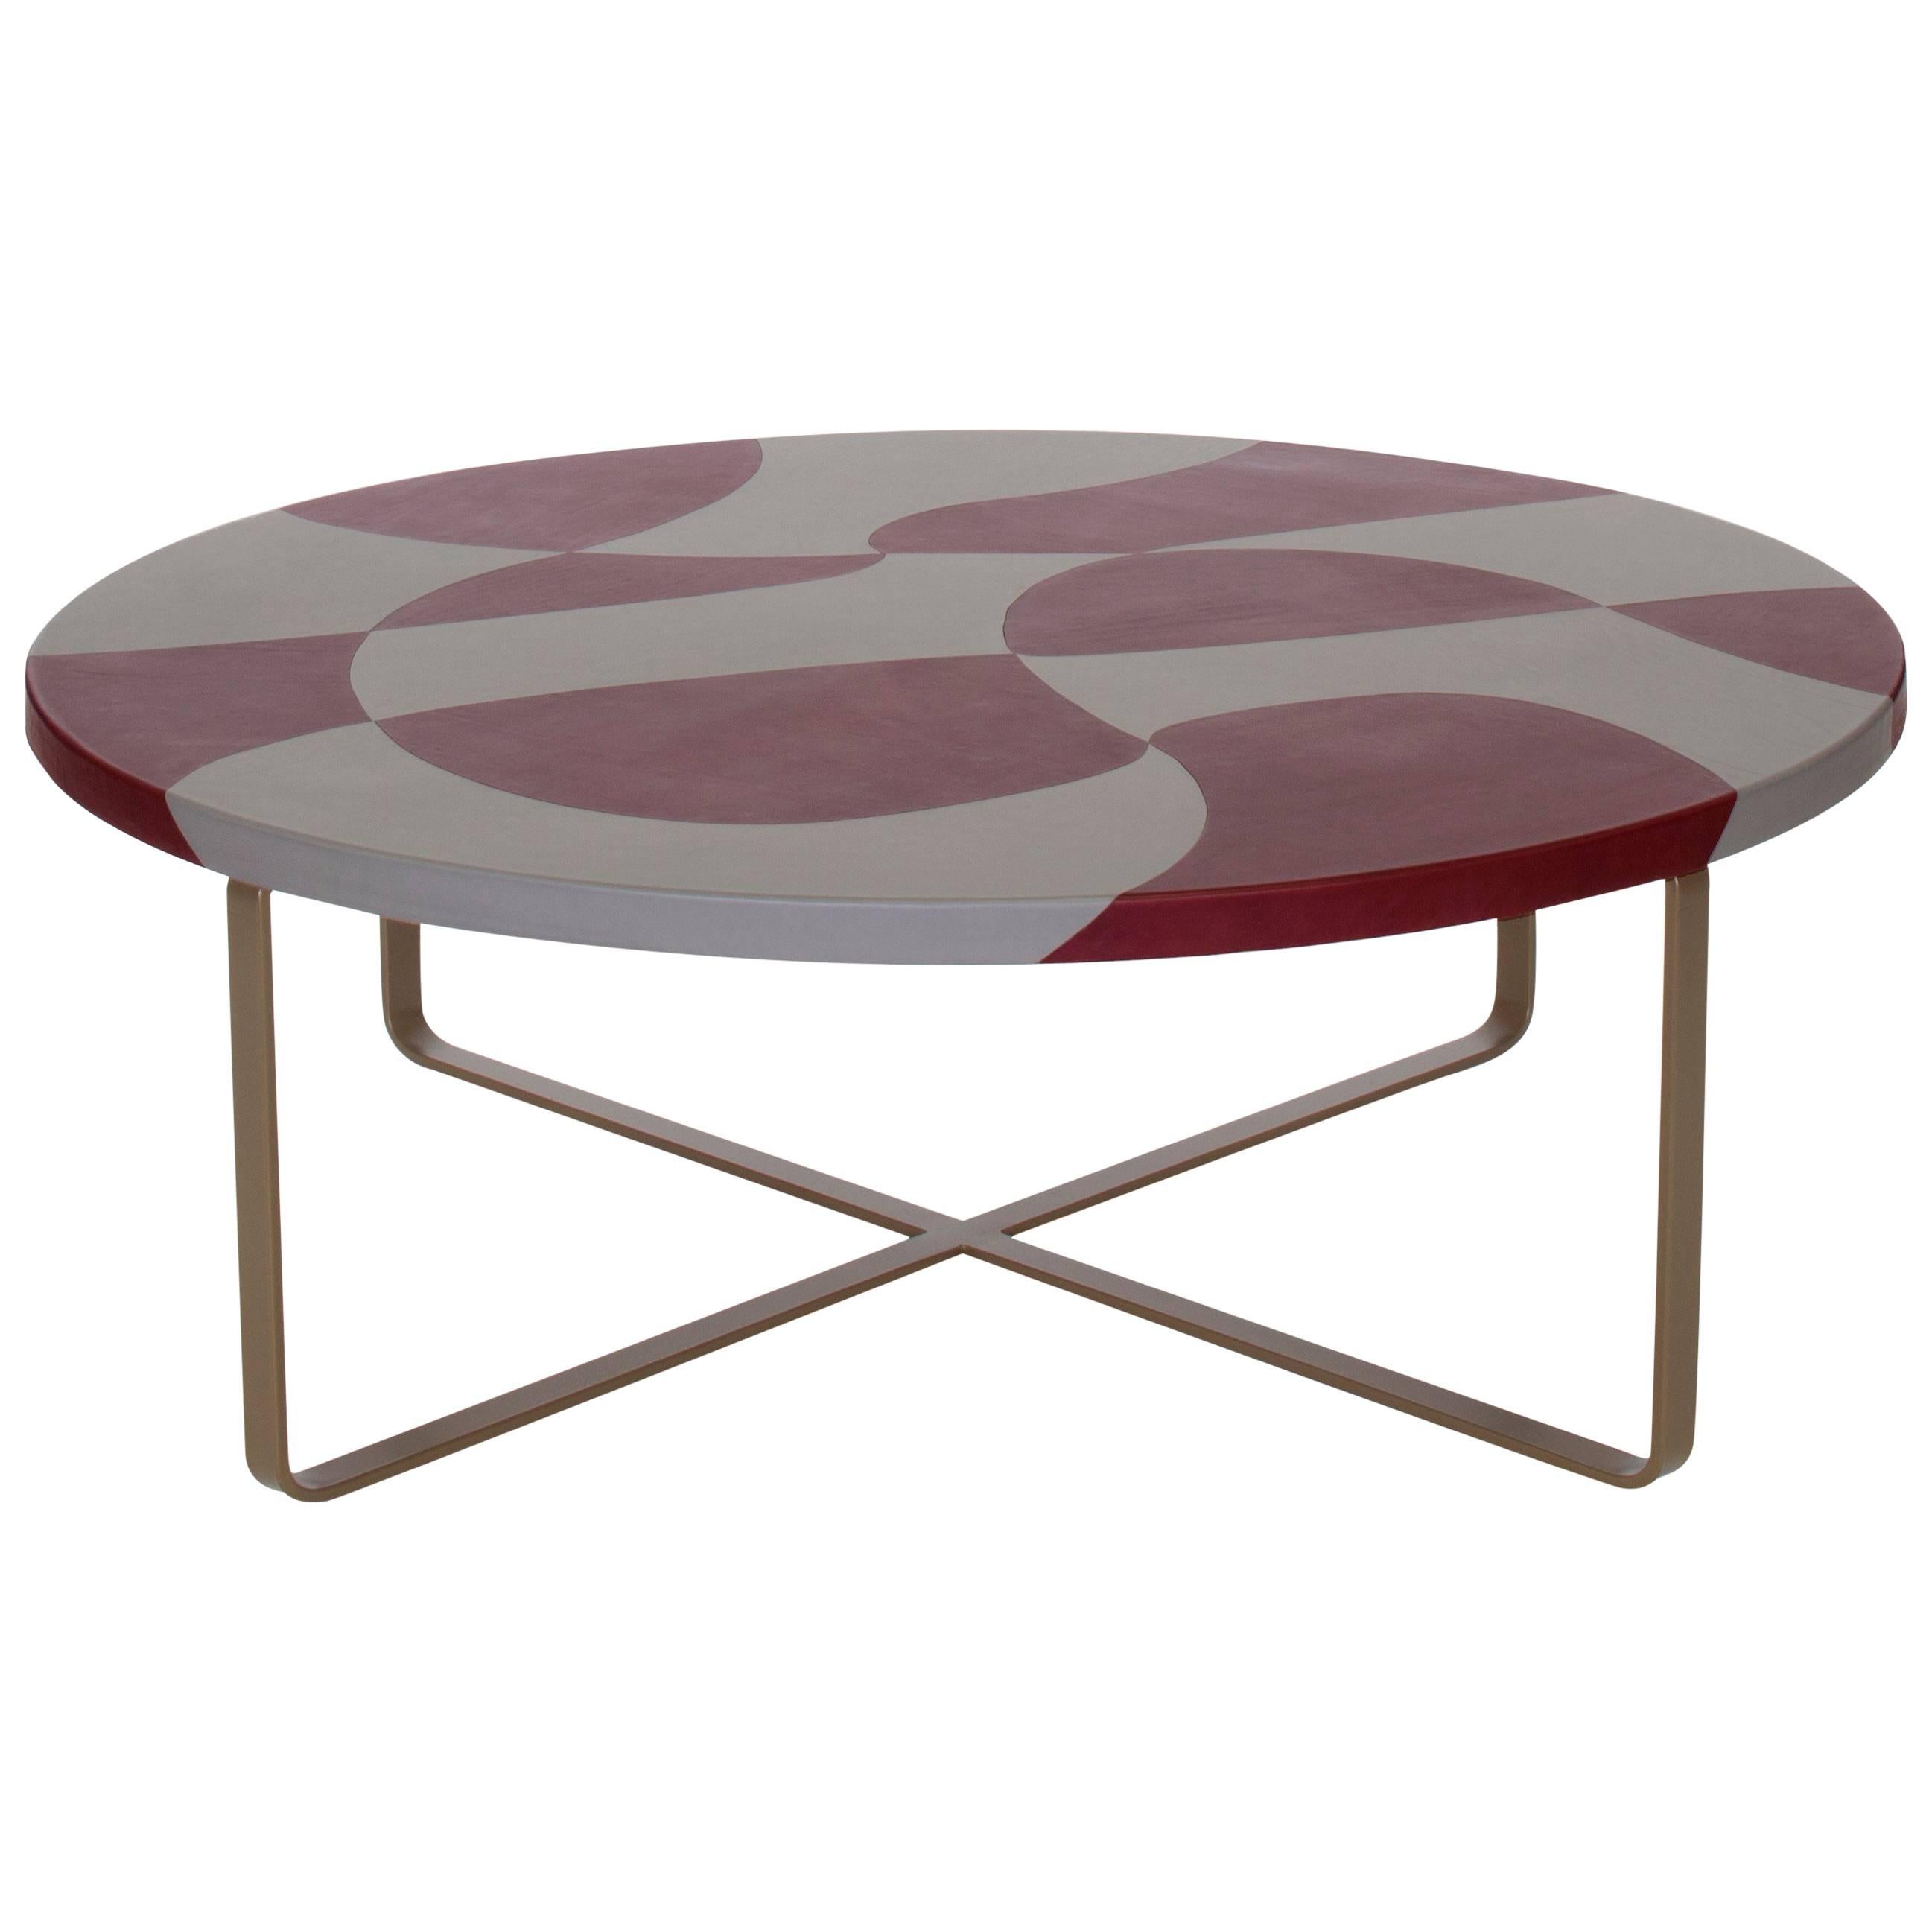 "Maupiti" Inlaid Leather Top Coffee Table by Nestor Perkal for Oscar Maschera